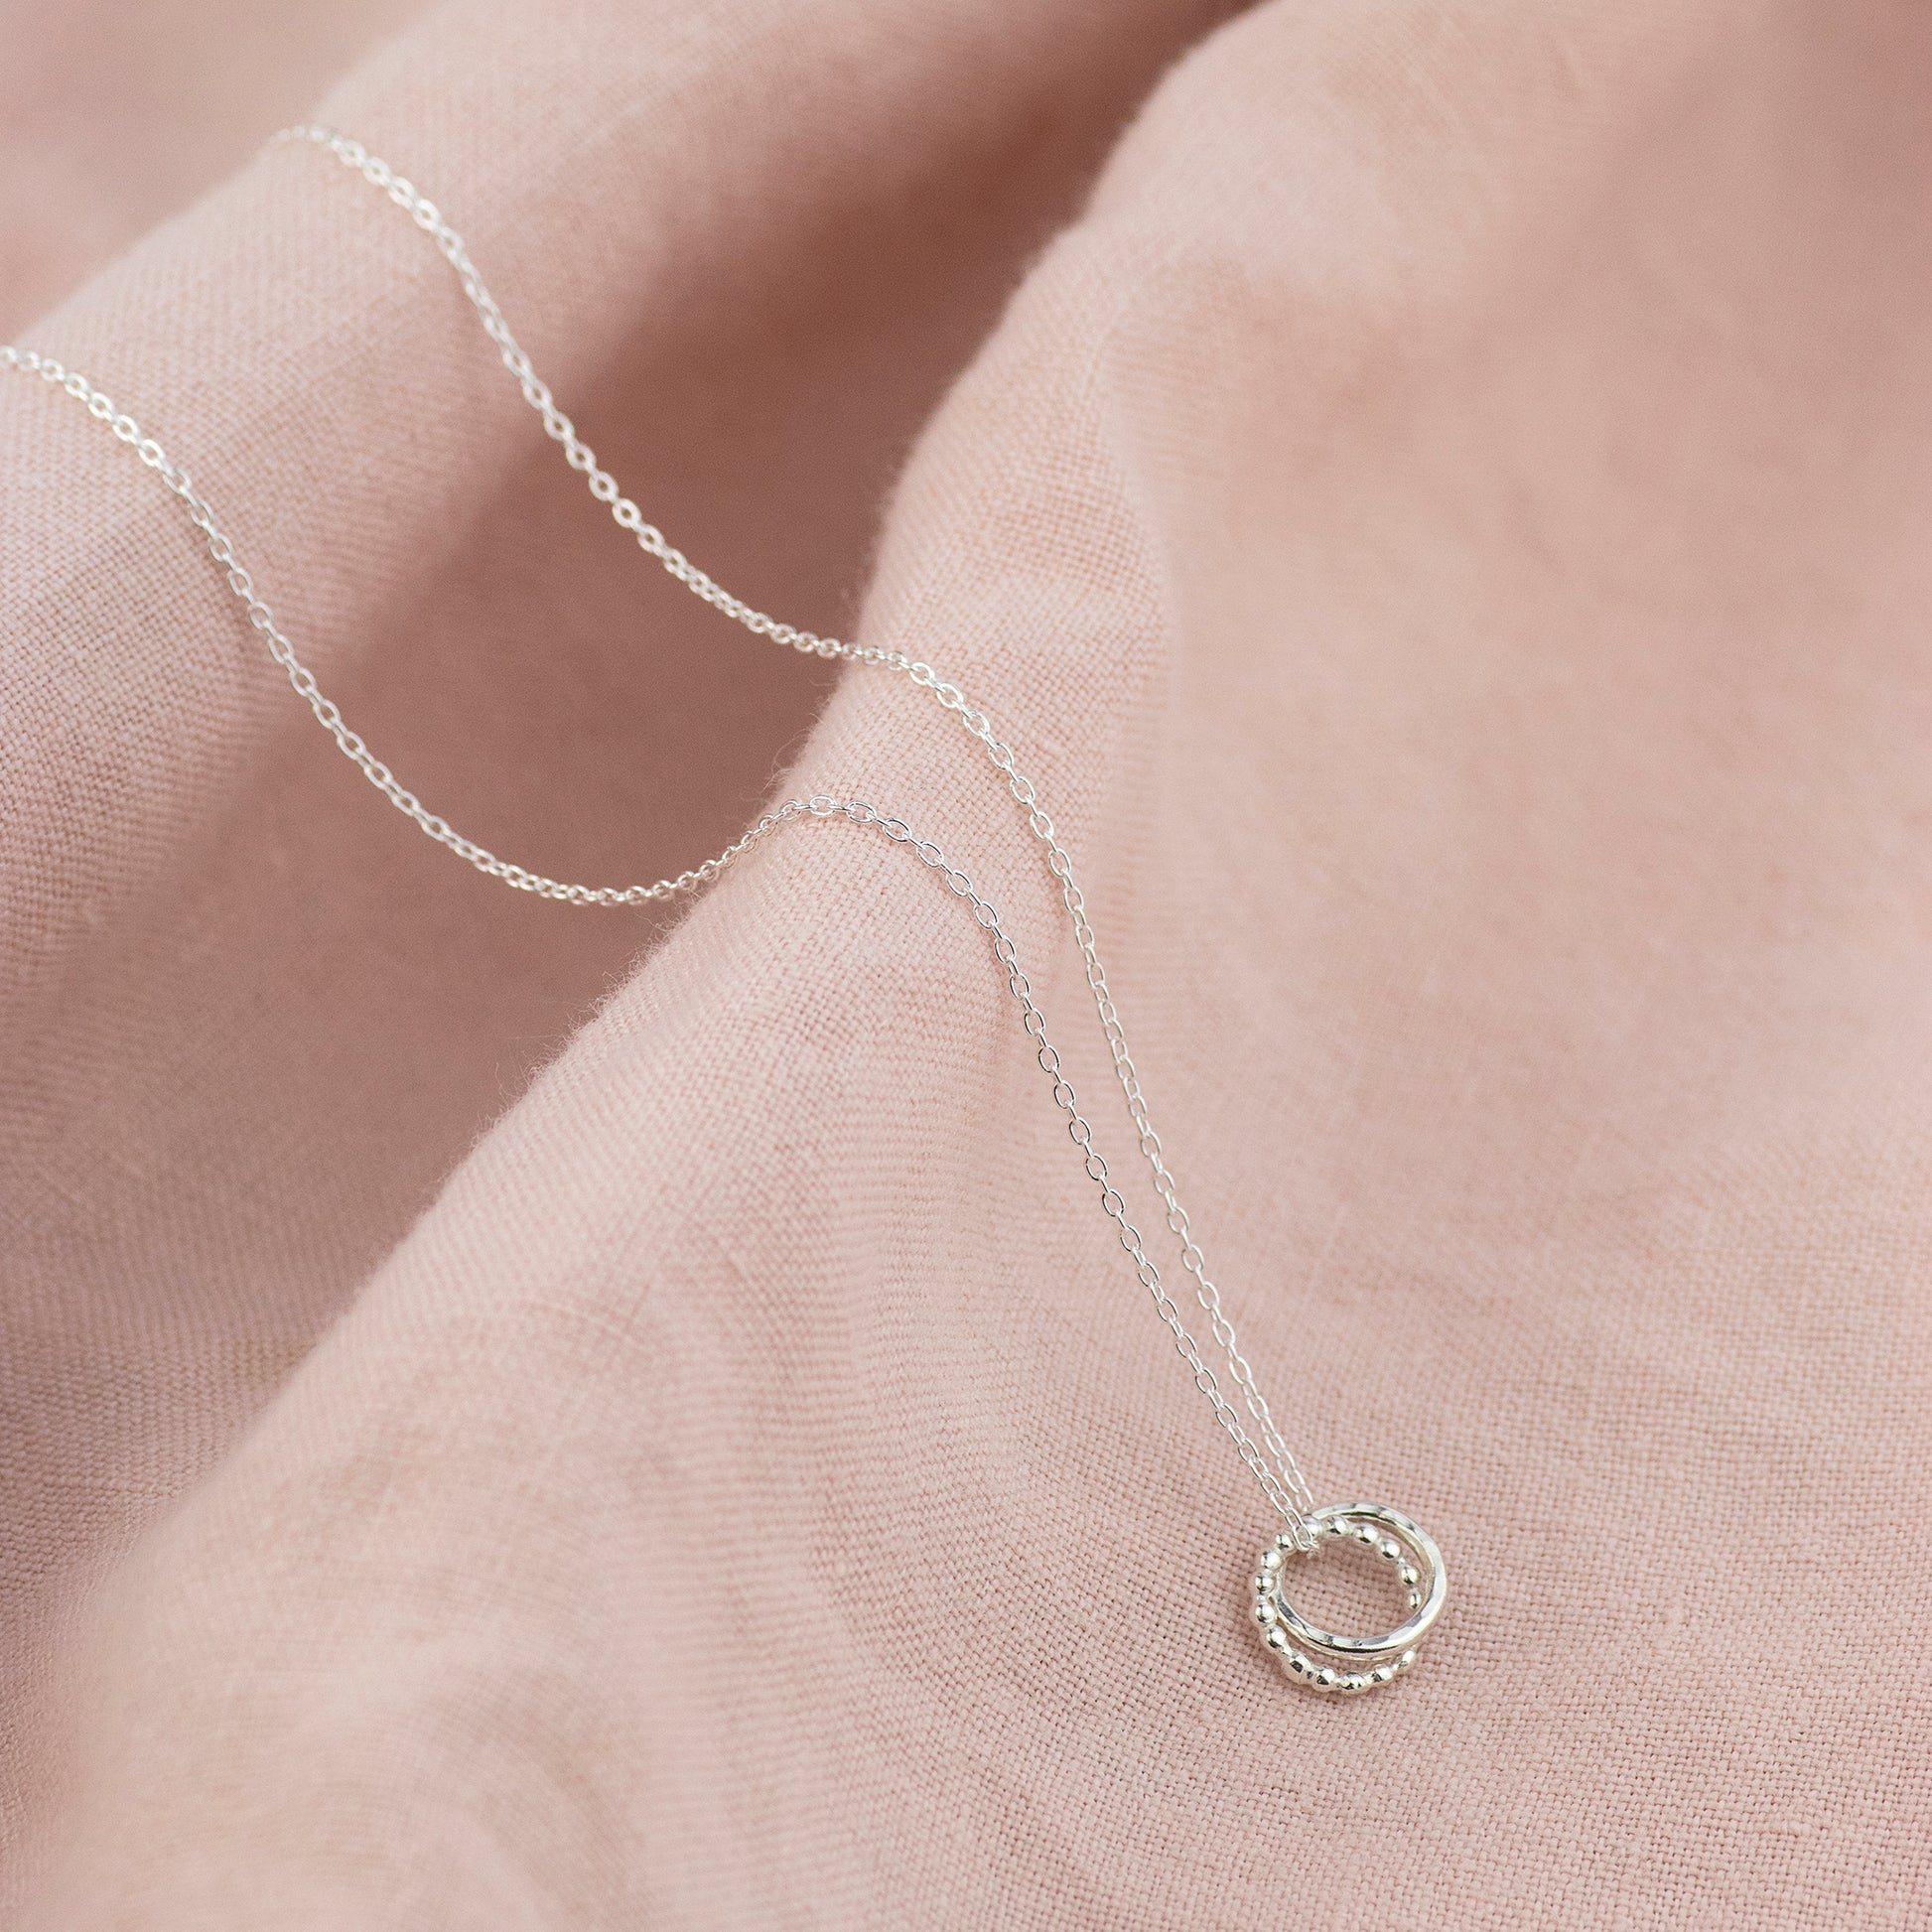 Bride & Bridesmaid Love Knot Necklace - Linked for a Lifetime - Silver